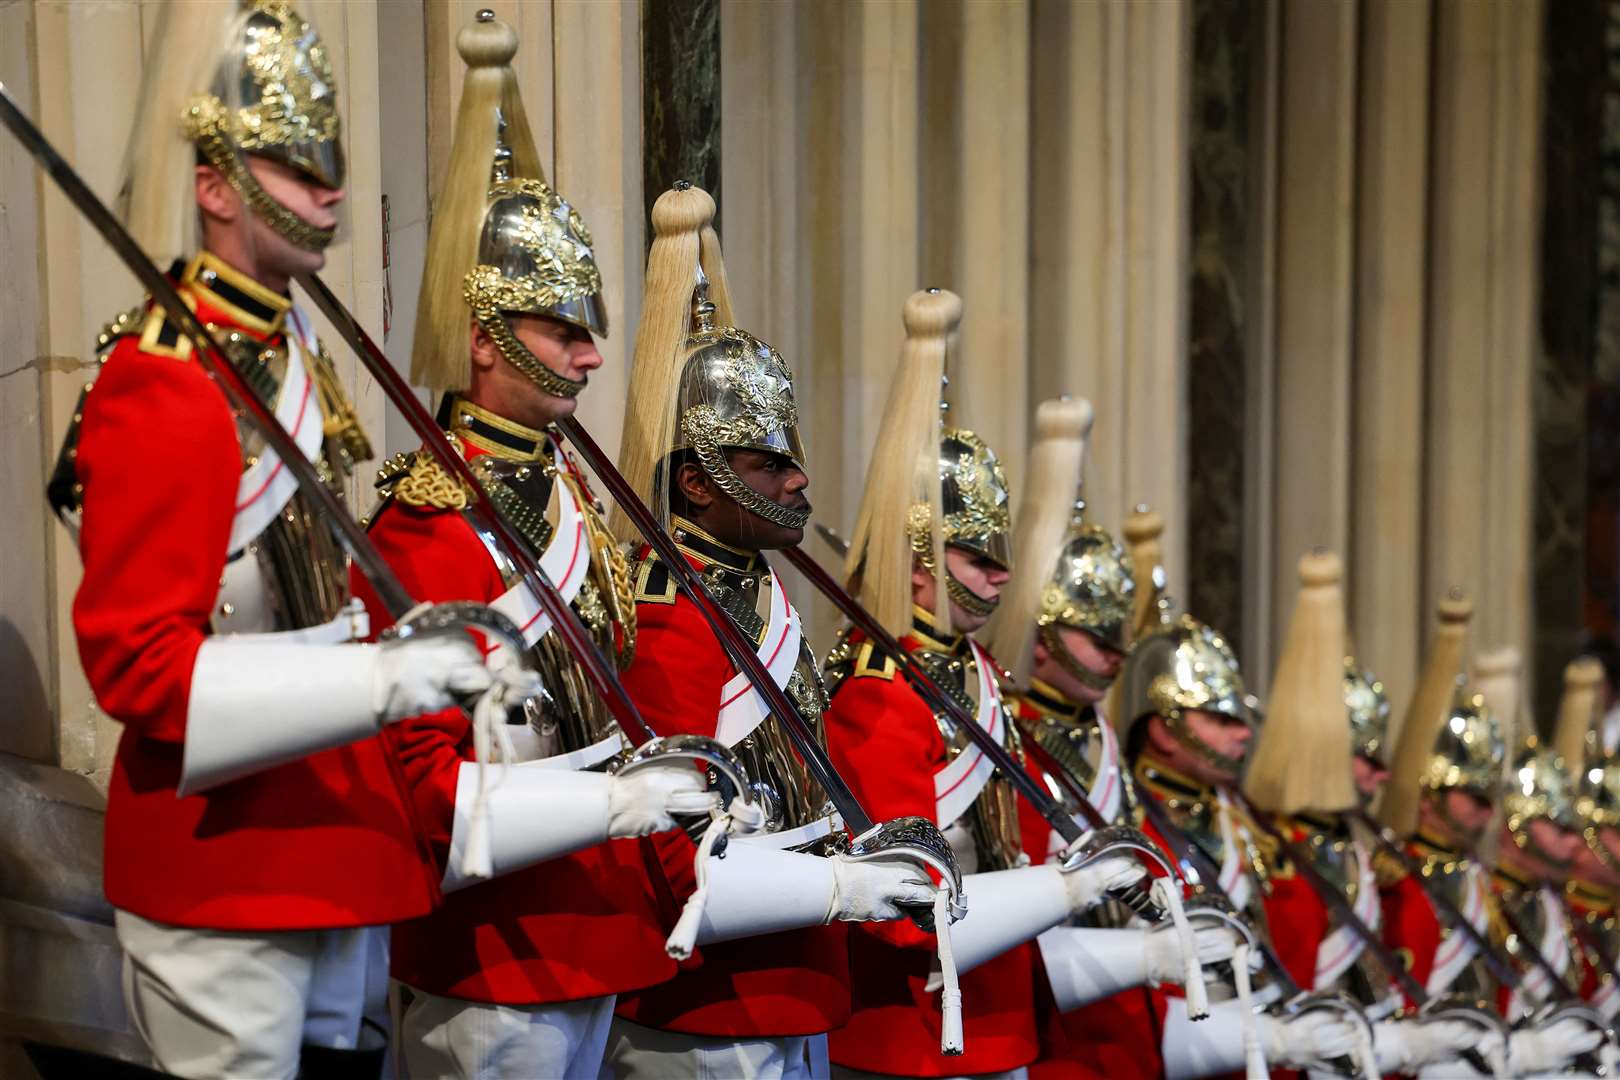 Members of the Household Cavalry at the Norman Porch at the Palace of Westminster (Toby Melville/PA)